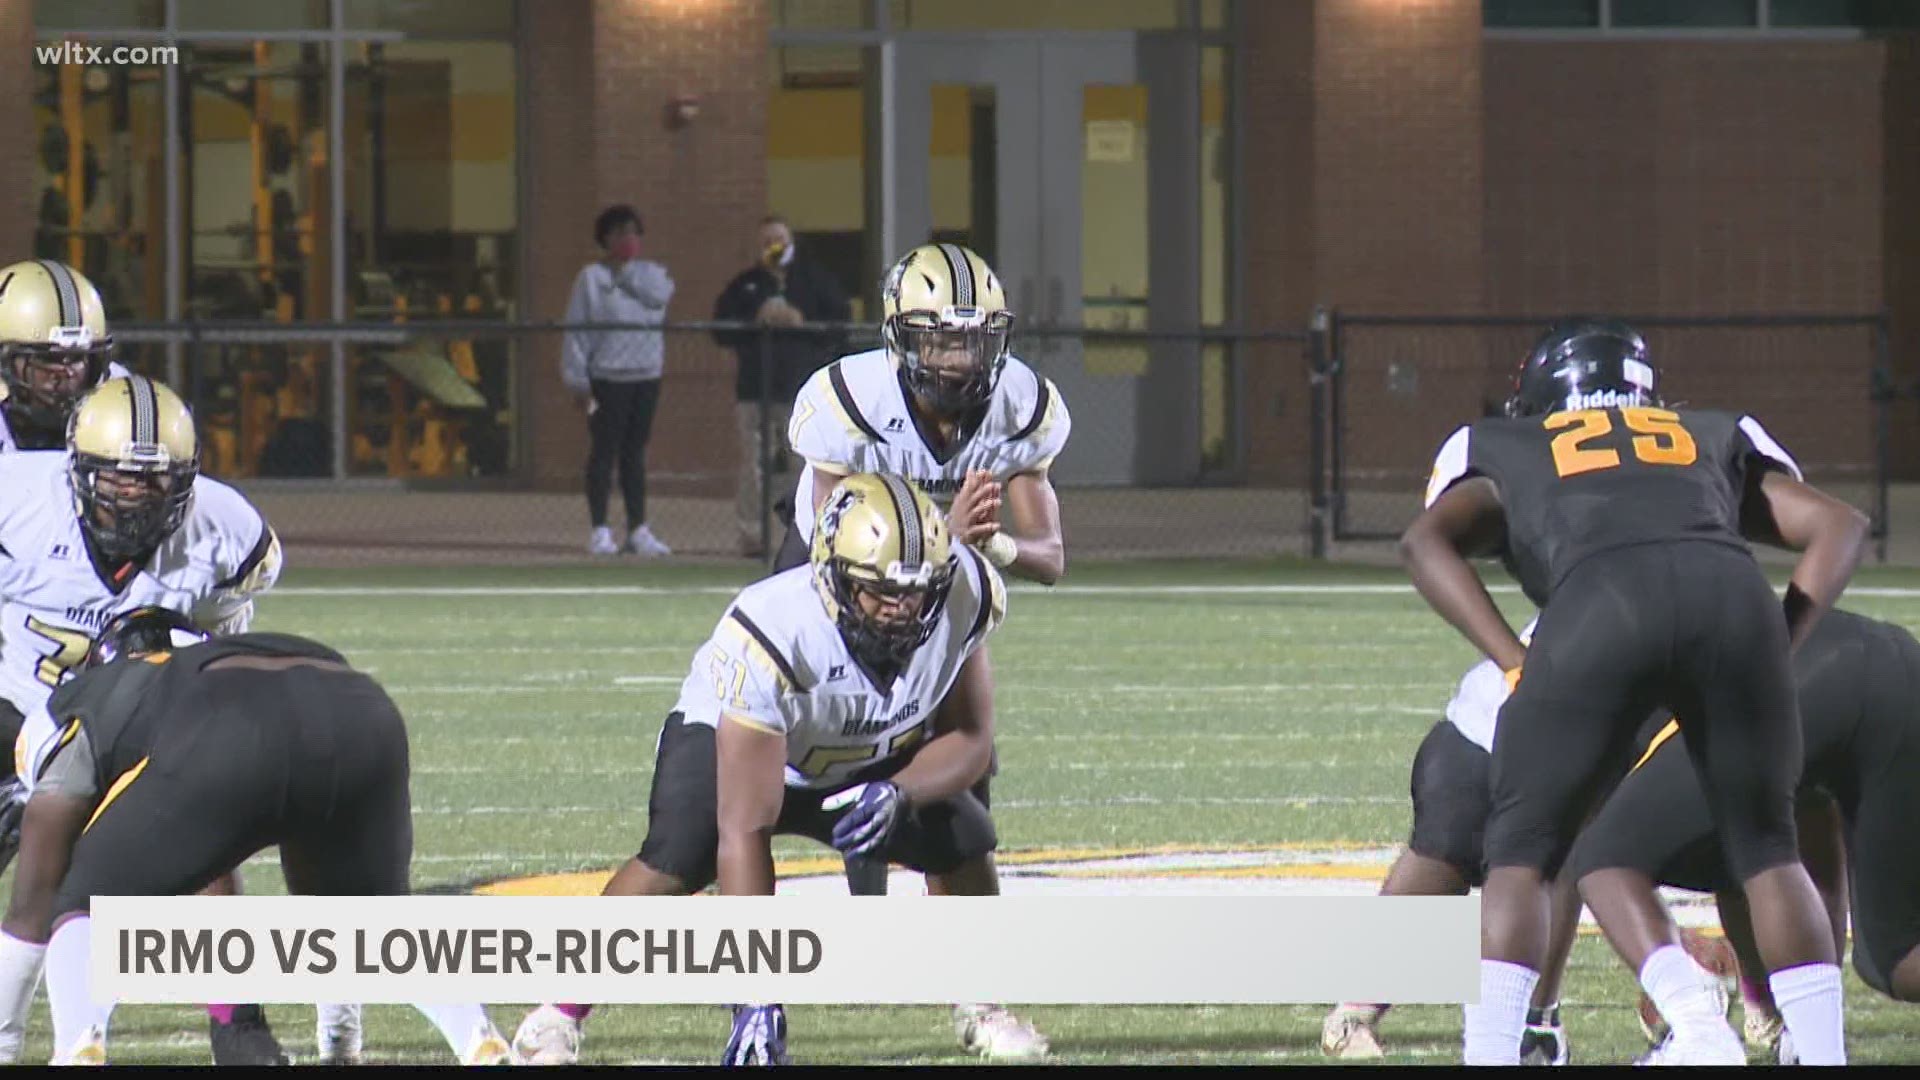 Scores and highlights from Midlands area high school football games on October 16, 2020. (Part 1)